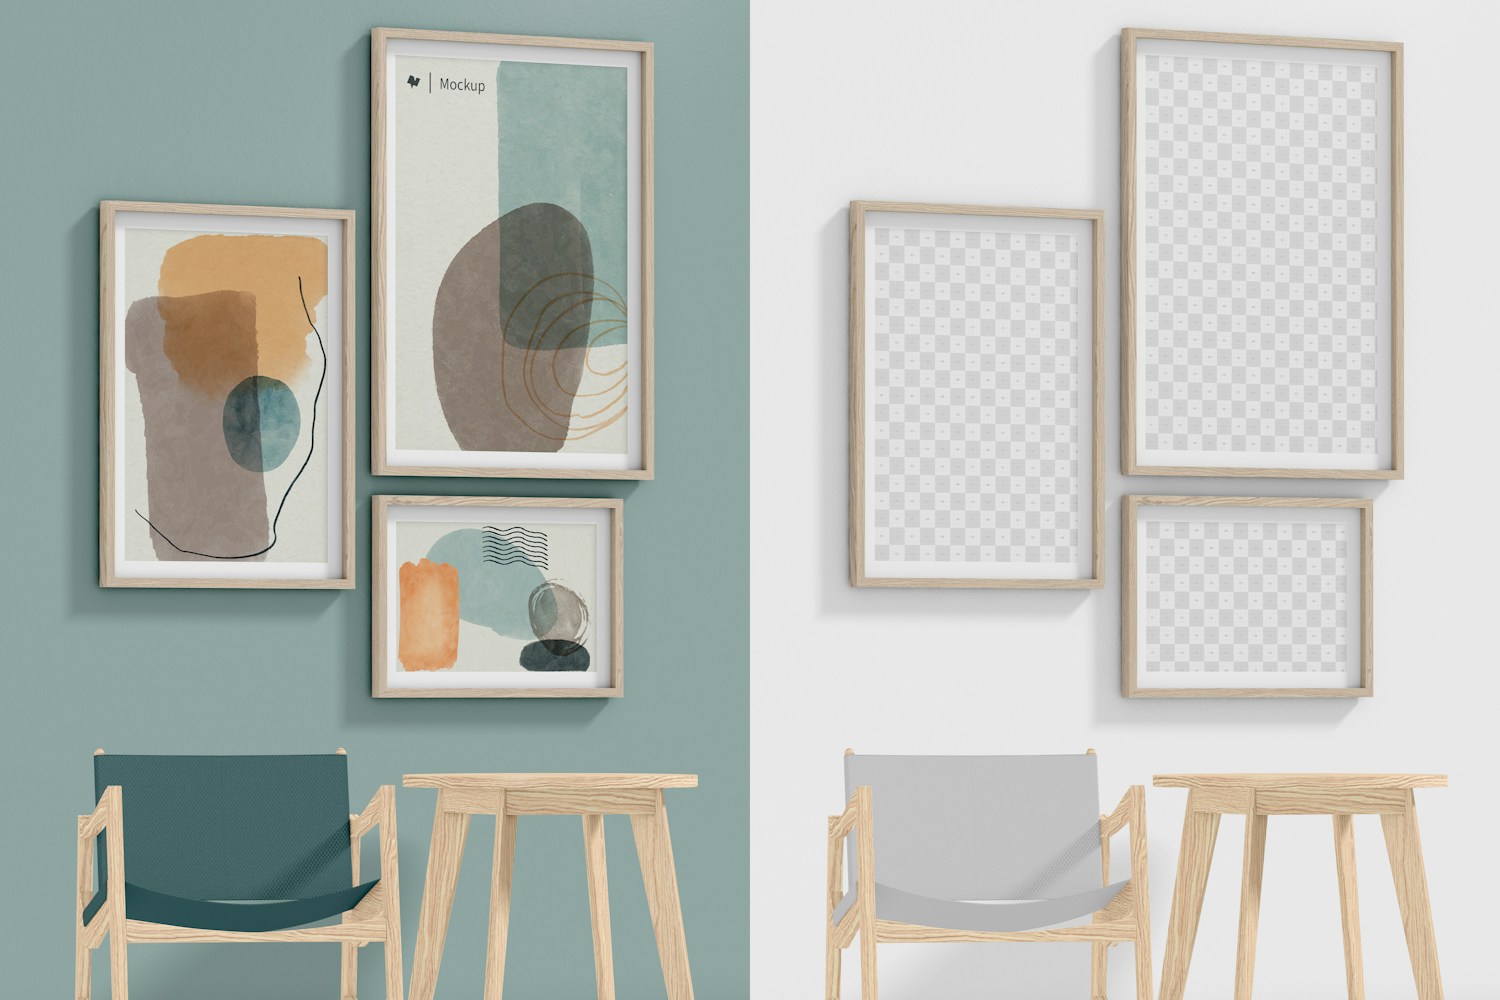 3 Gallery Frames with Rocking Chair Mockup, Perspective